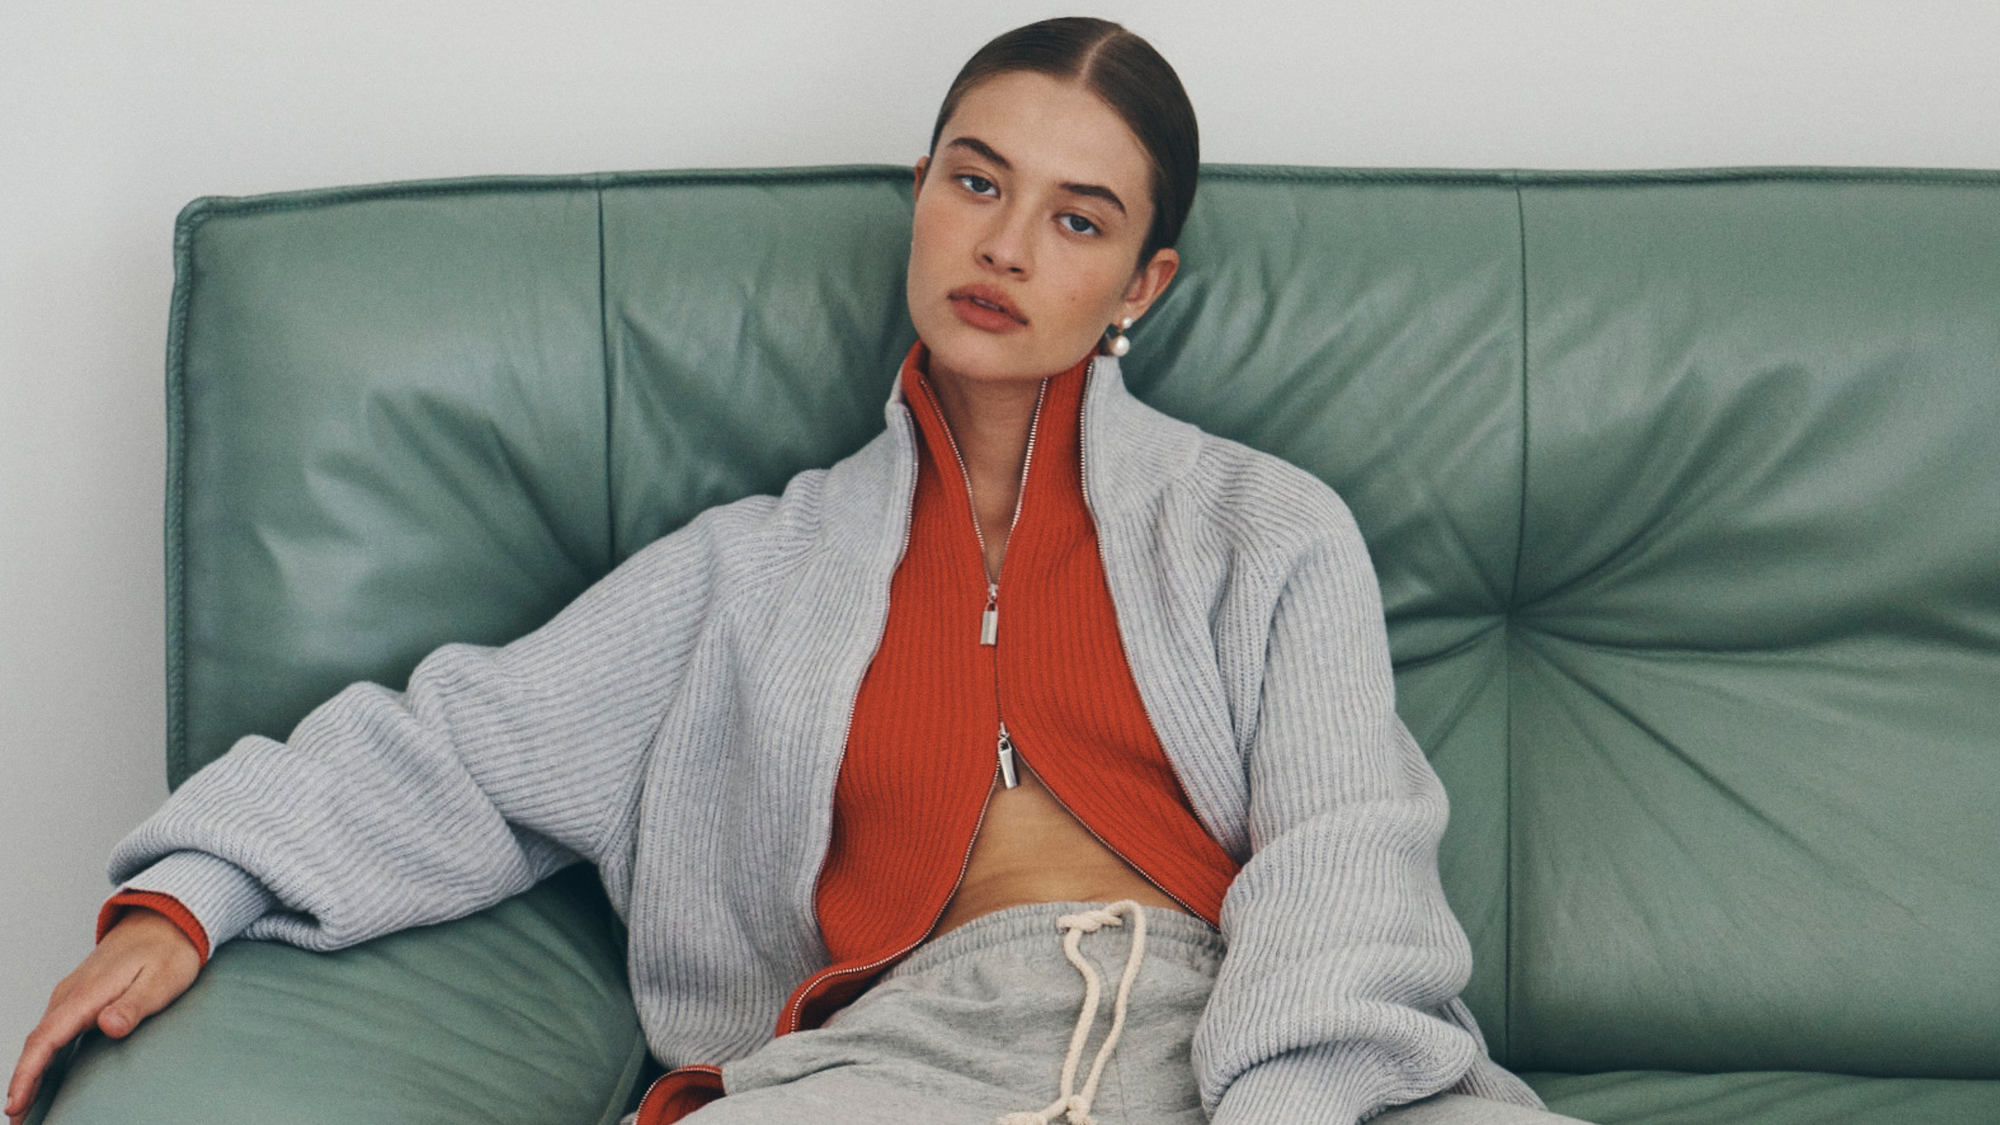 Bianca wears the Banjo Zip Knit Cardigan in both Crimson Red and Grey Marle paired with the Vena Terry Snap Pants in Grey Marle. Bianca lounges on a green leather sofa and accessorises with pearl drop earrings.